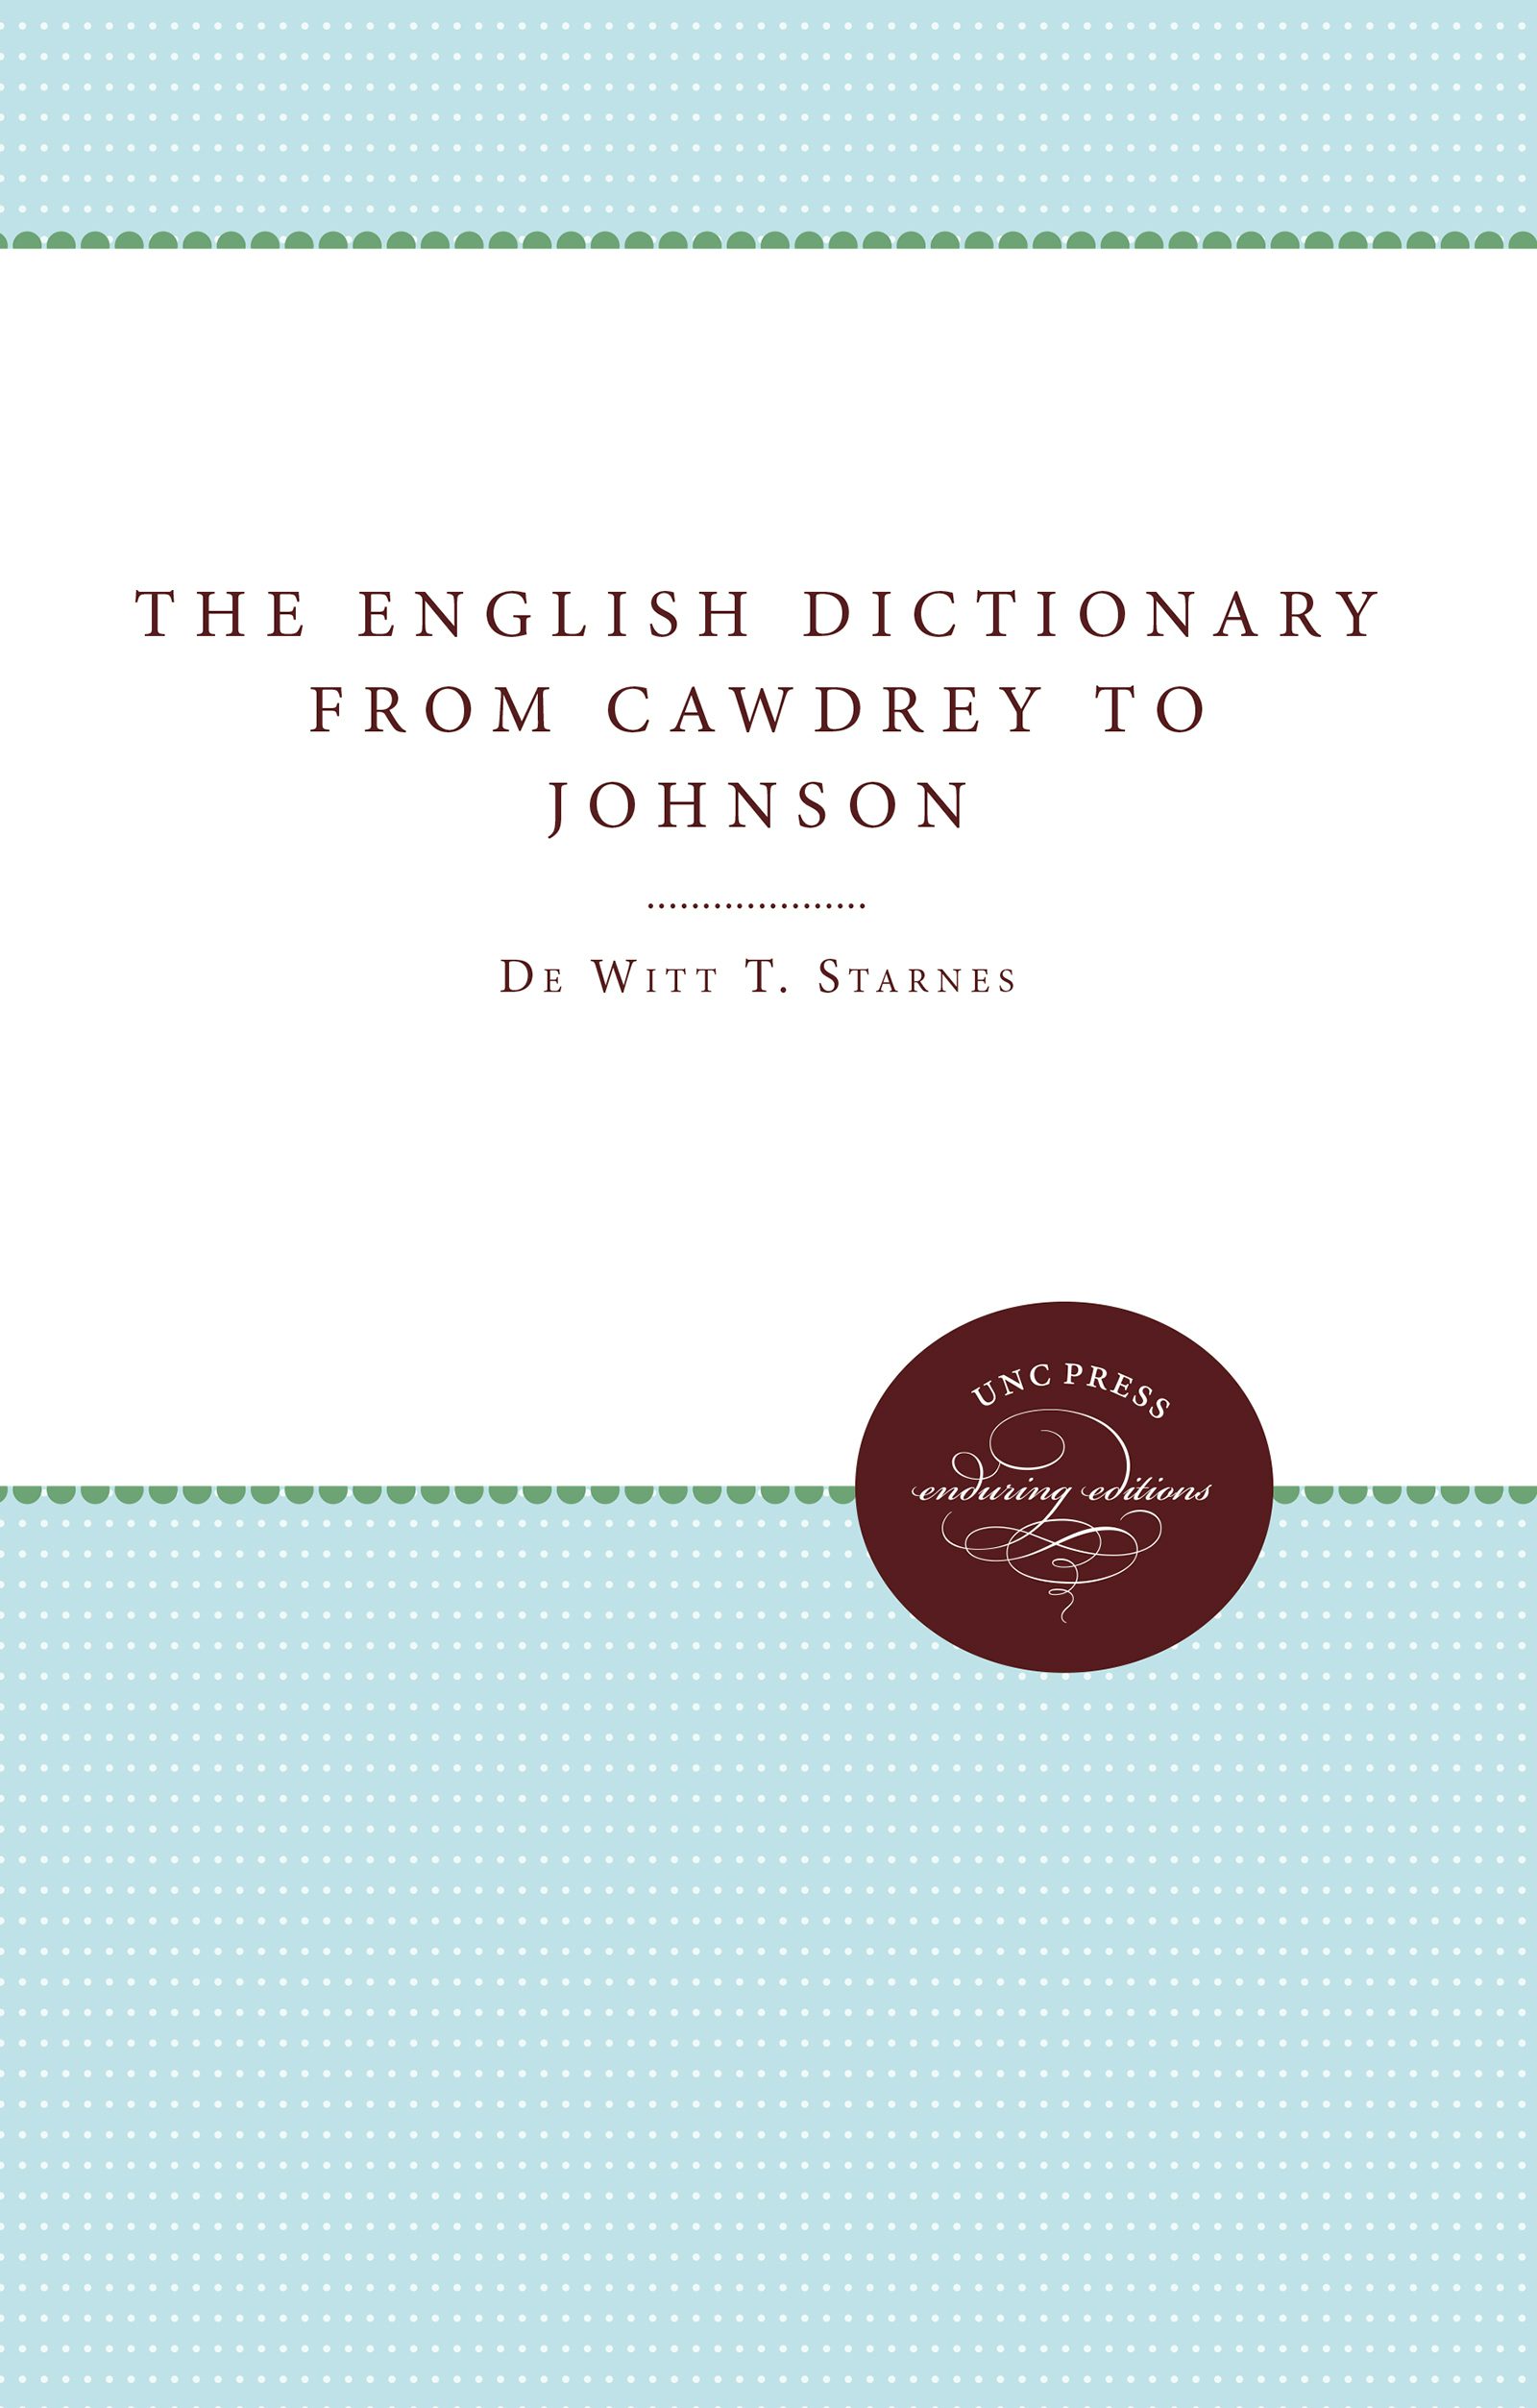 The English Dictionary from Cawdrey to Johnson